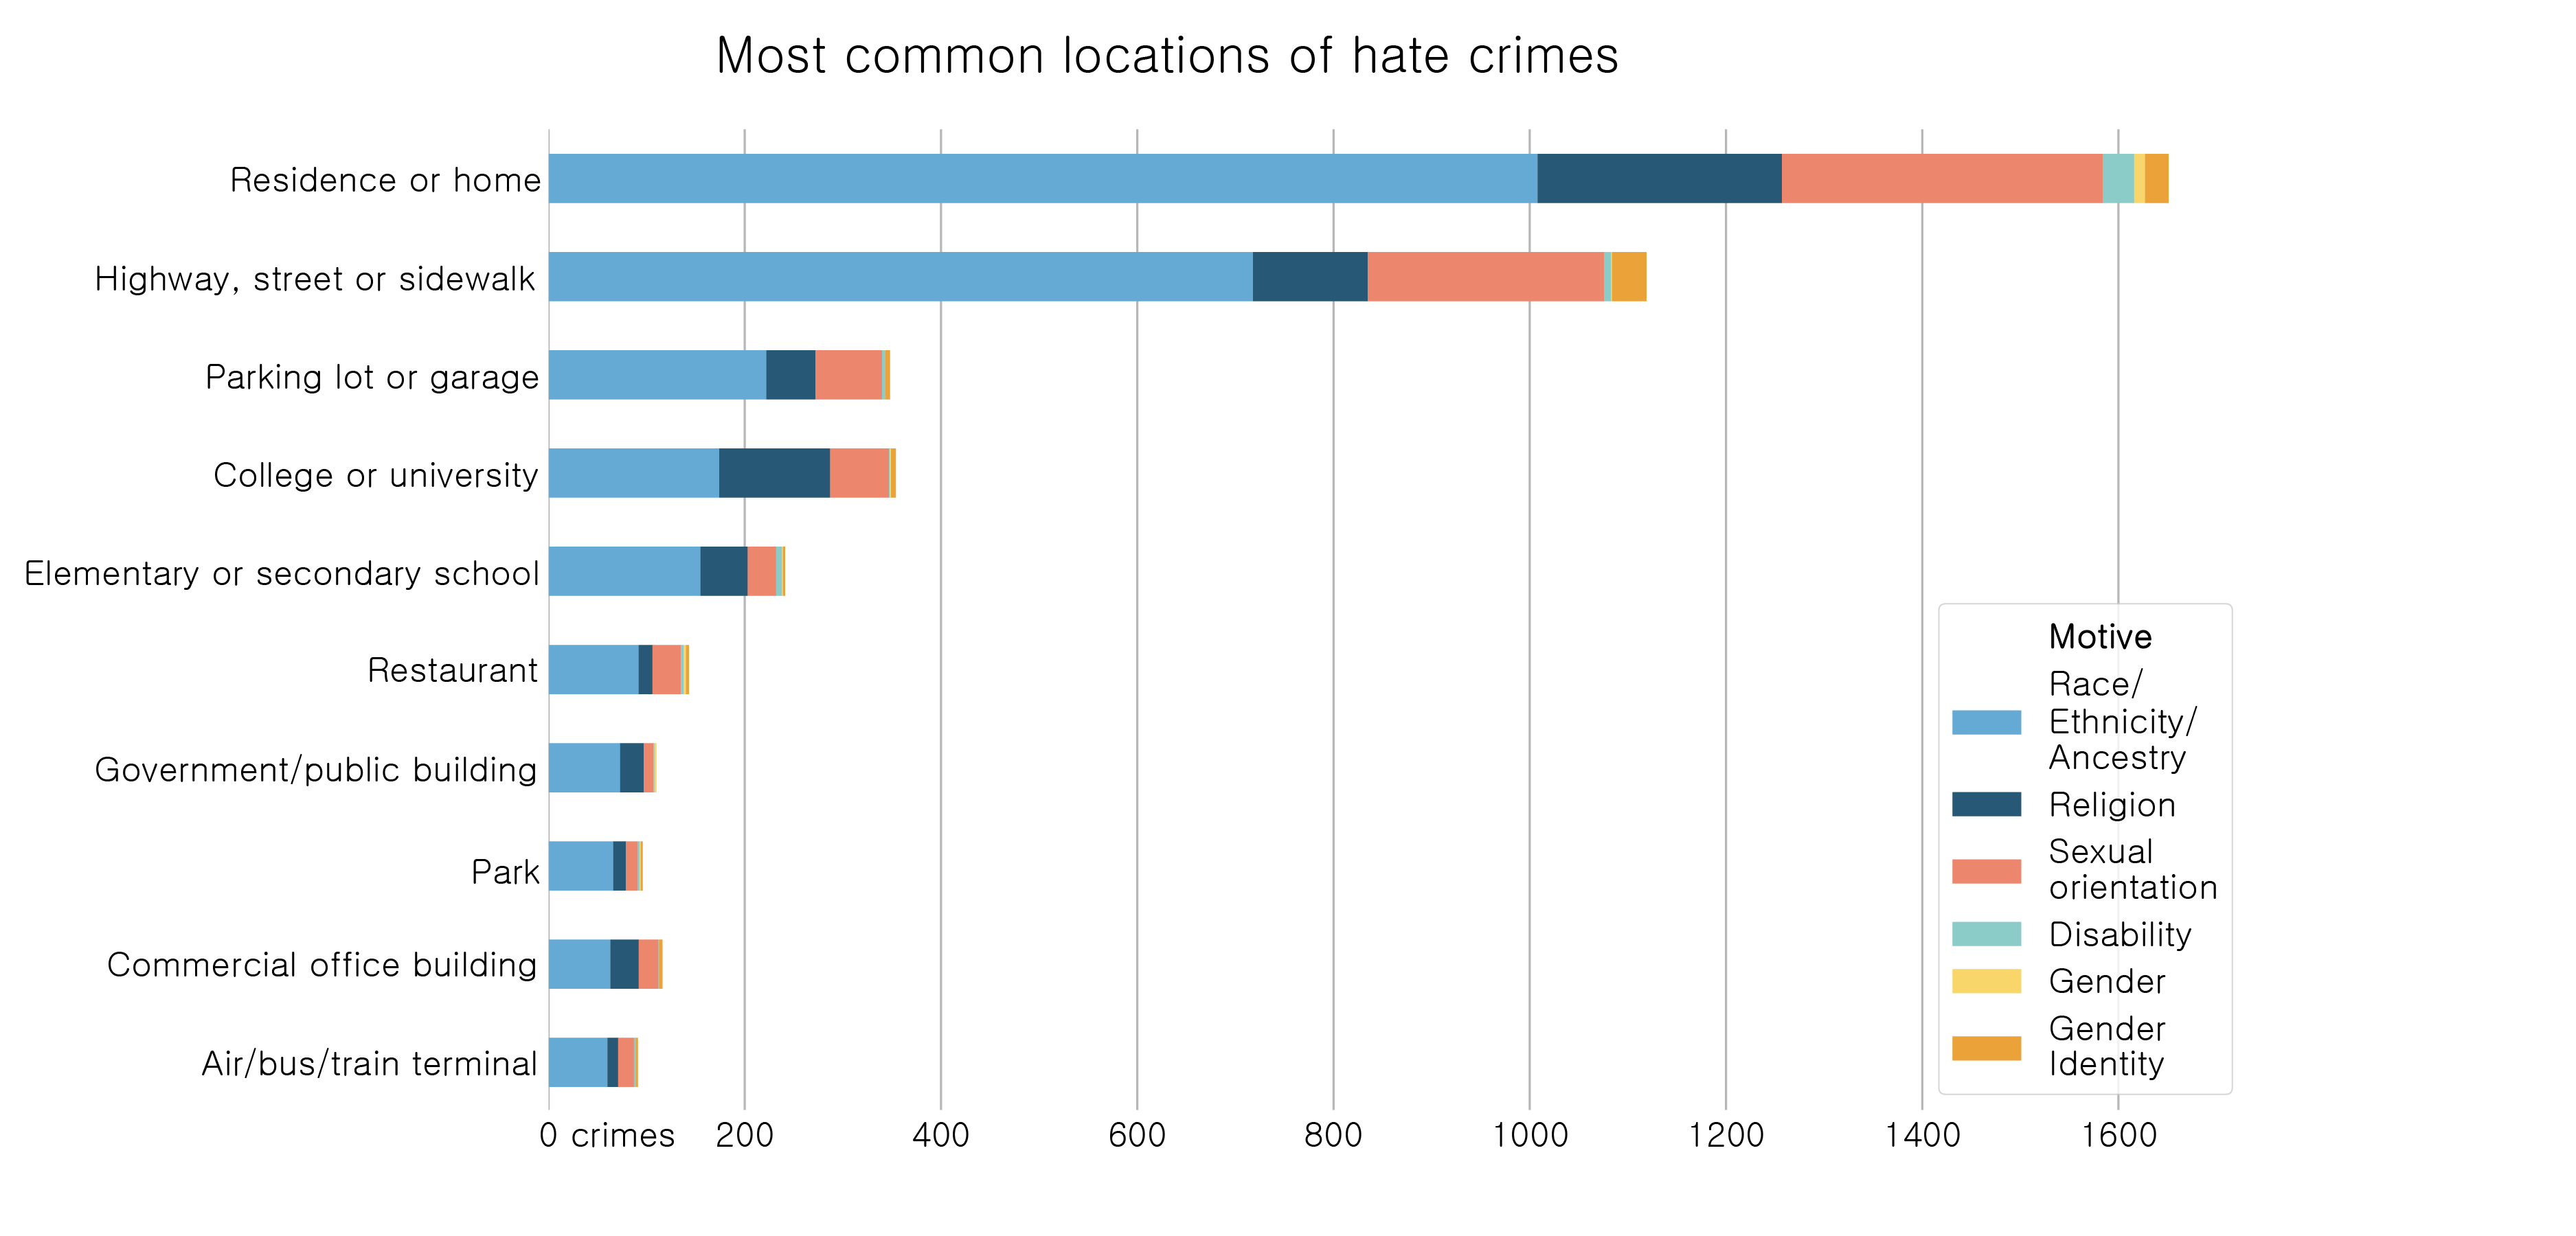 Top 10 locations of hate crimes in 2016